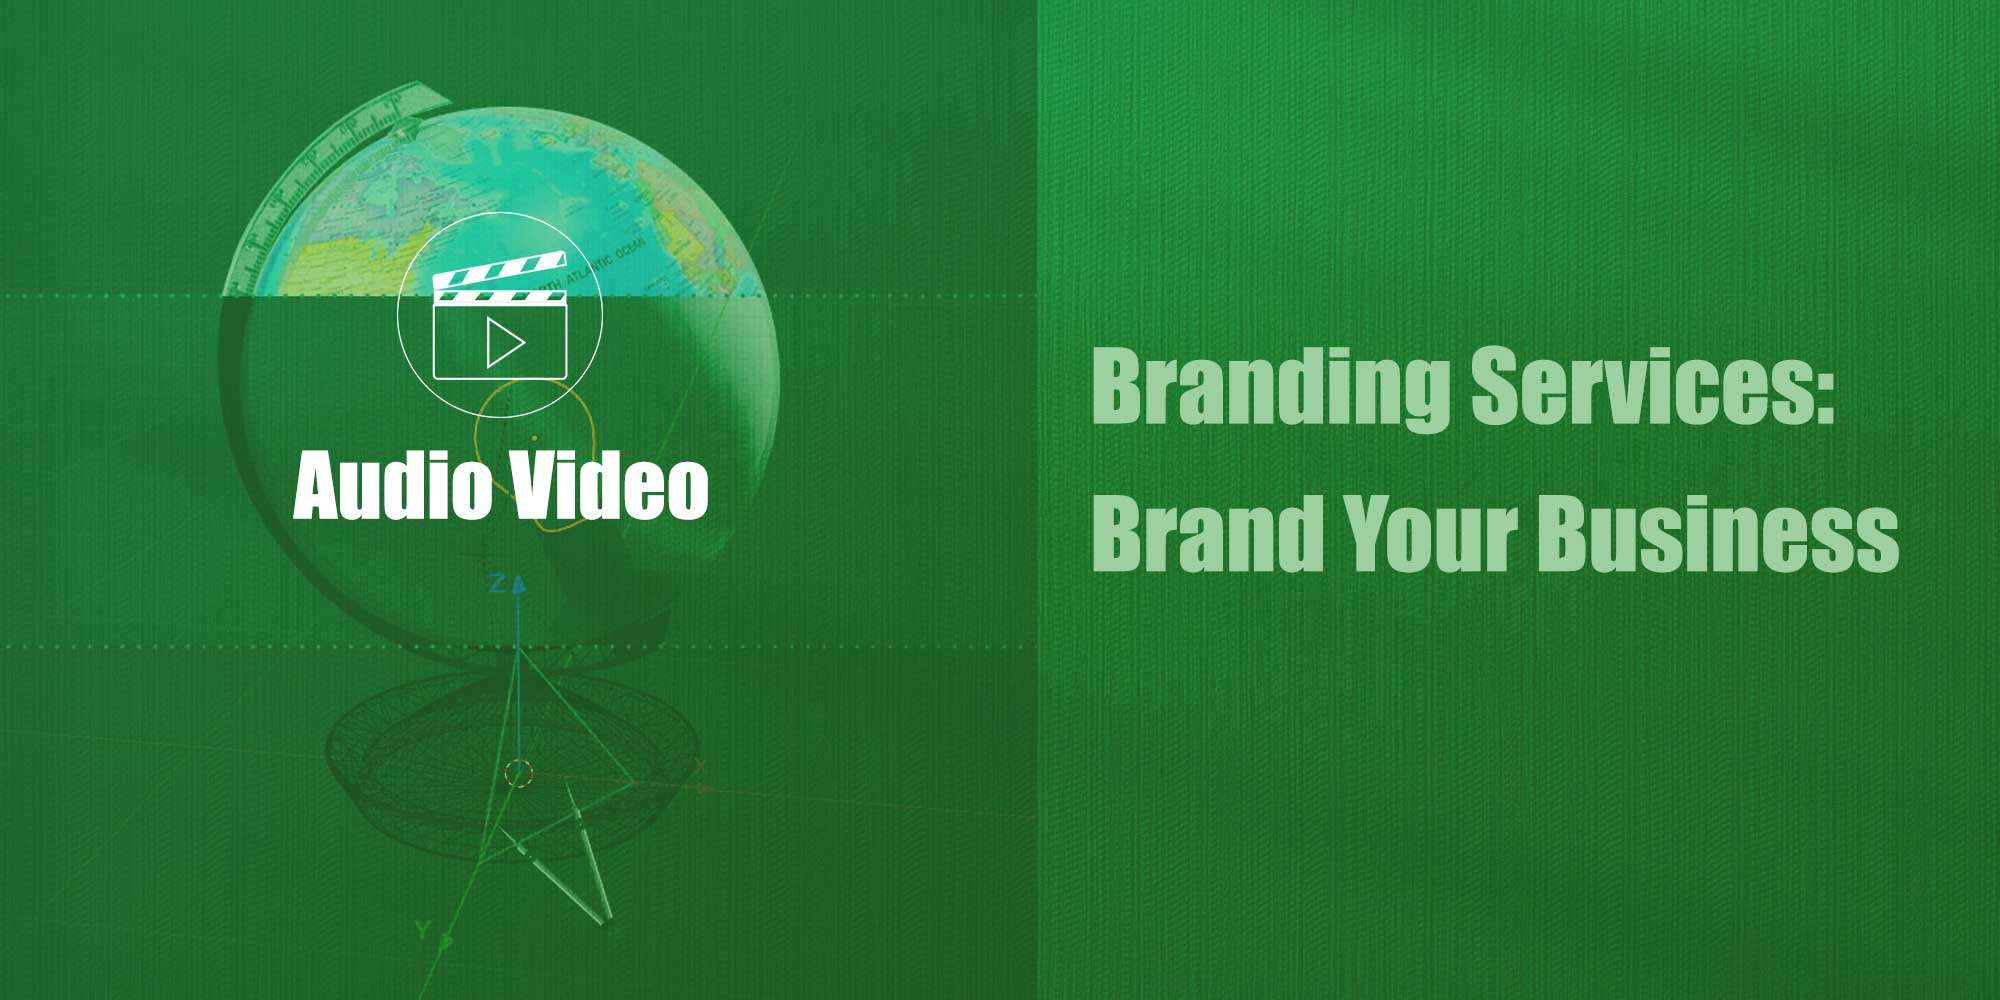 branding-services-brand-your-business-Audio-and-Video